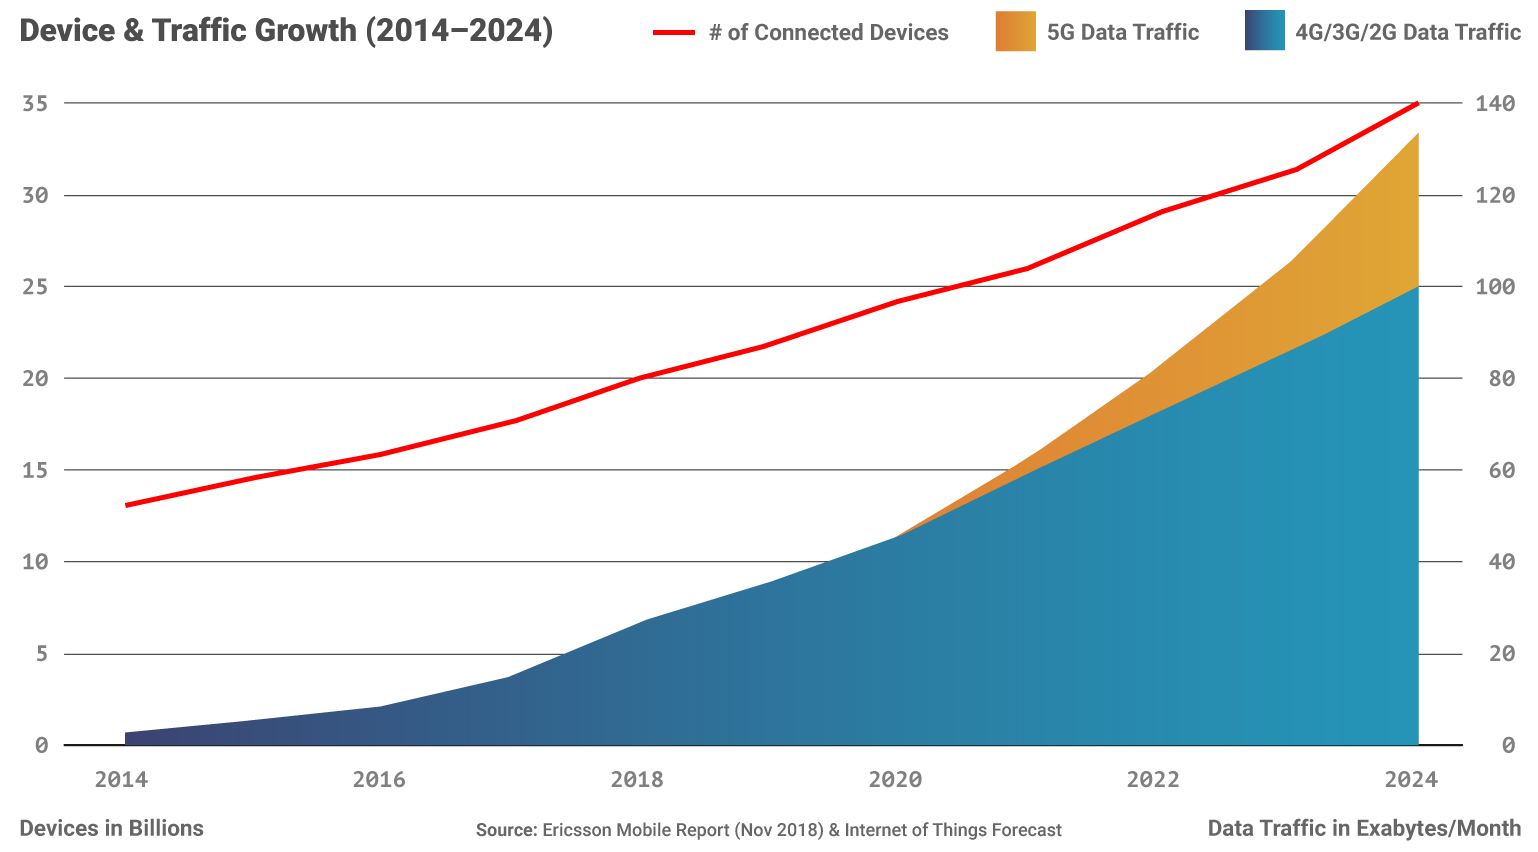 Device Growth Rate and Data Traffic